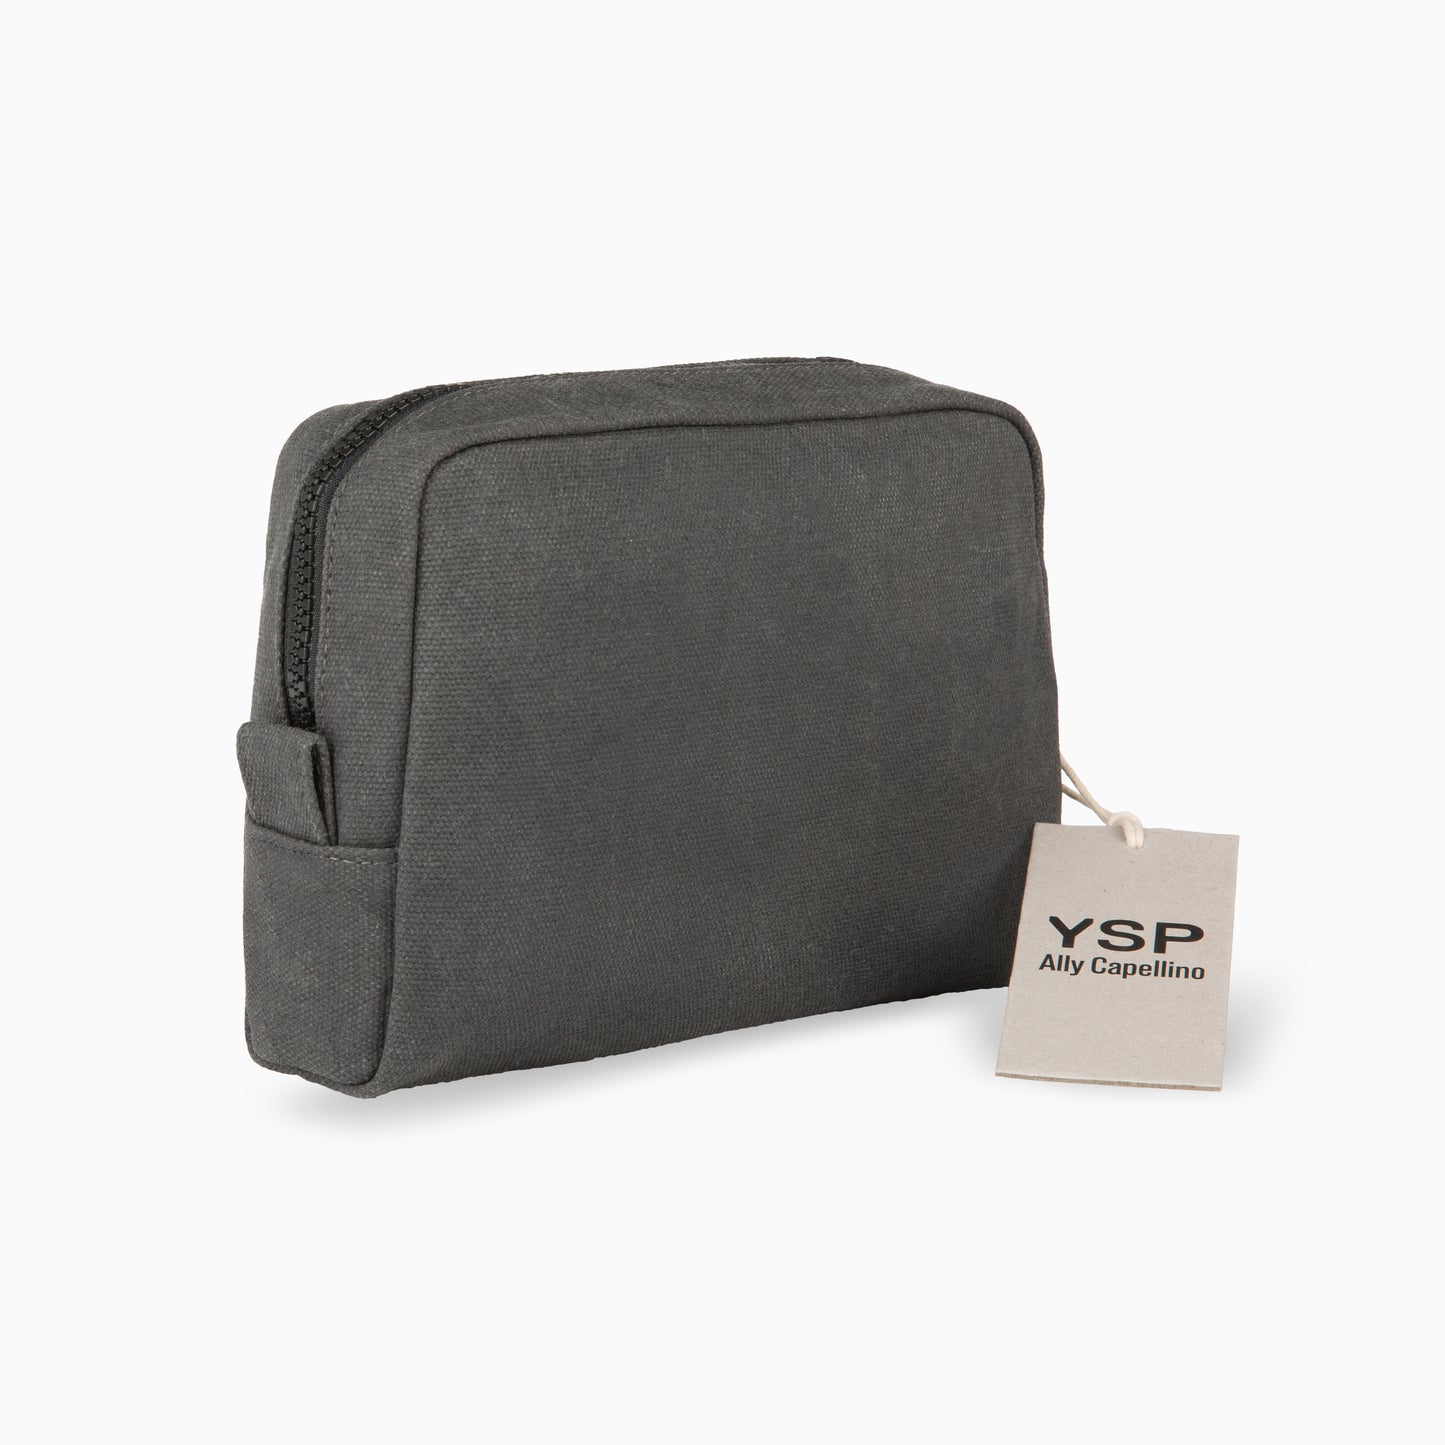 Ally Capellino x YSP Toiletry Pouch